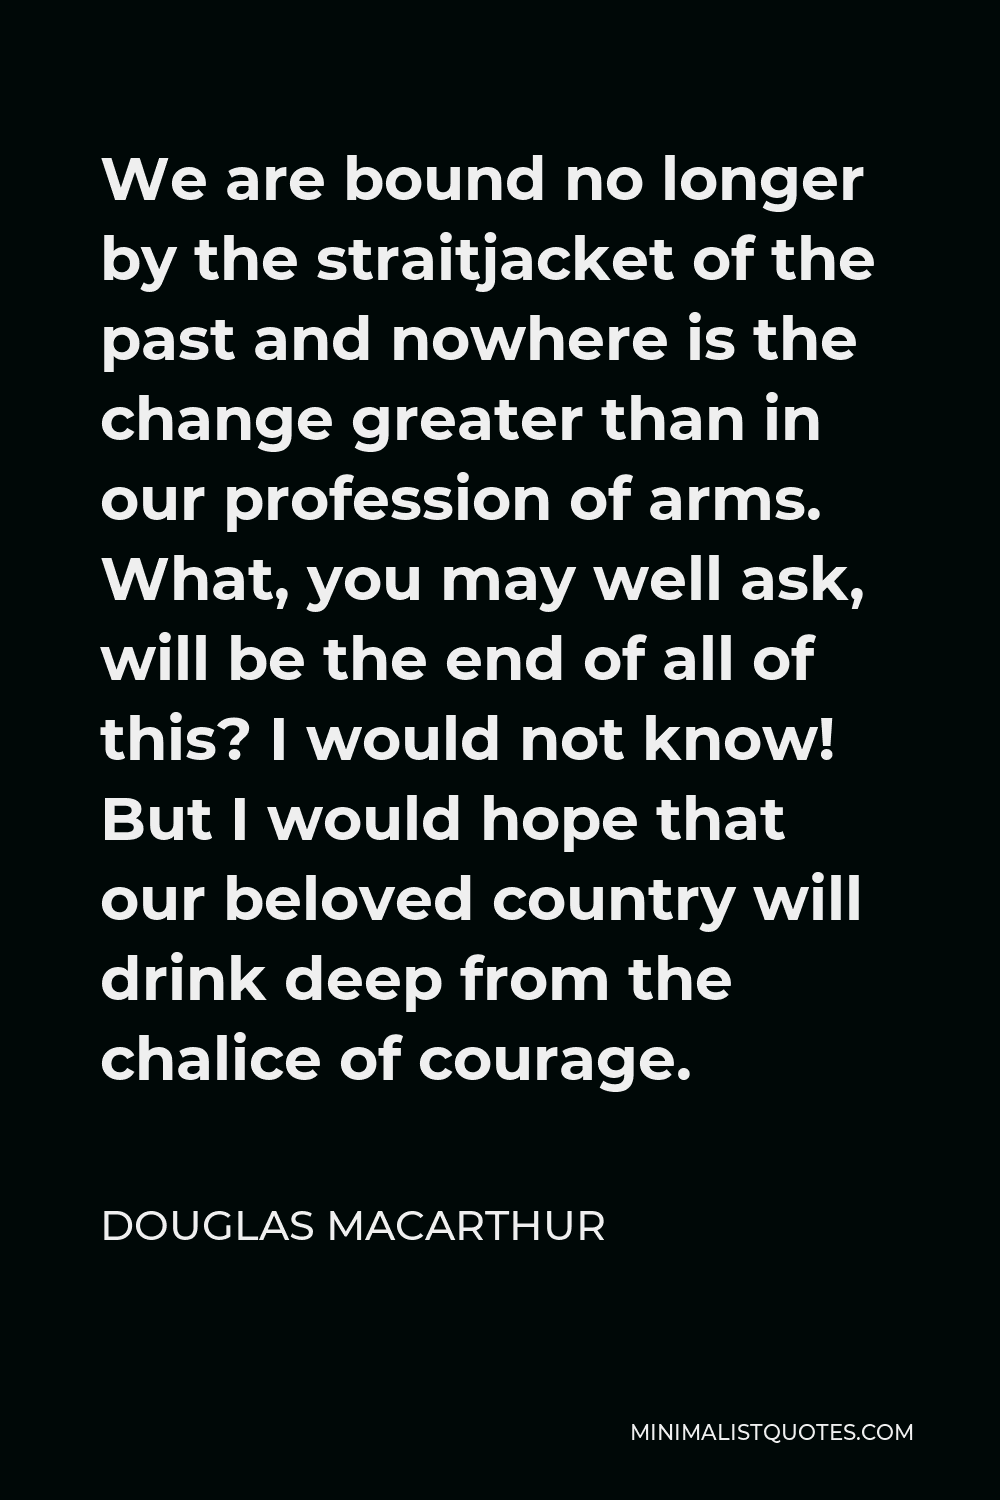 Douglas MacArthur Quote - We are bound no longer by the straitjacket of the past and nowhere is the change greater than in our profession of arms. What, you may well ask, will be the end of all of this? I would not know! But I would hope that our beloved country will drink deep from the chalice of courage.